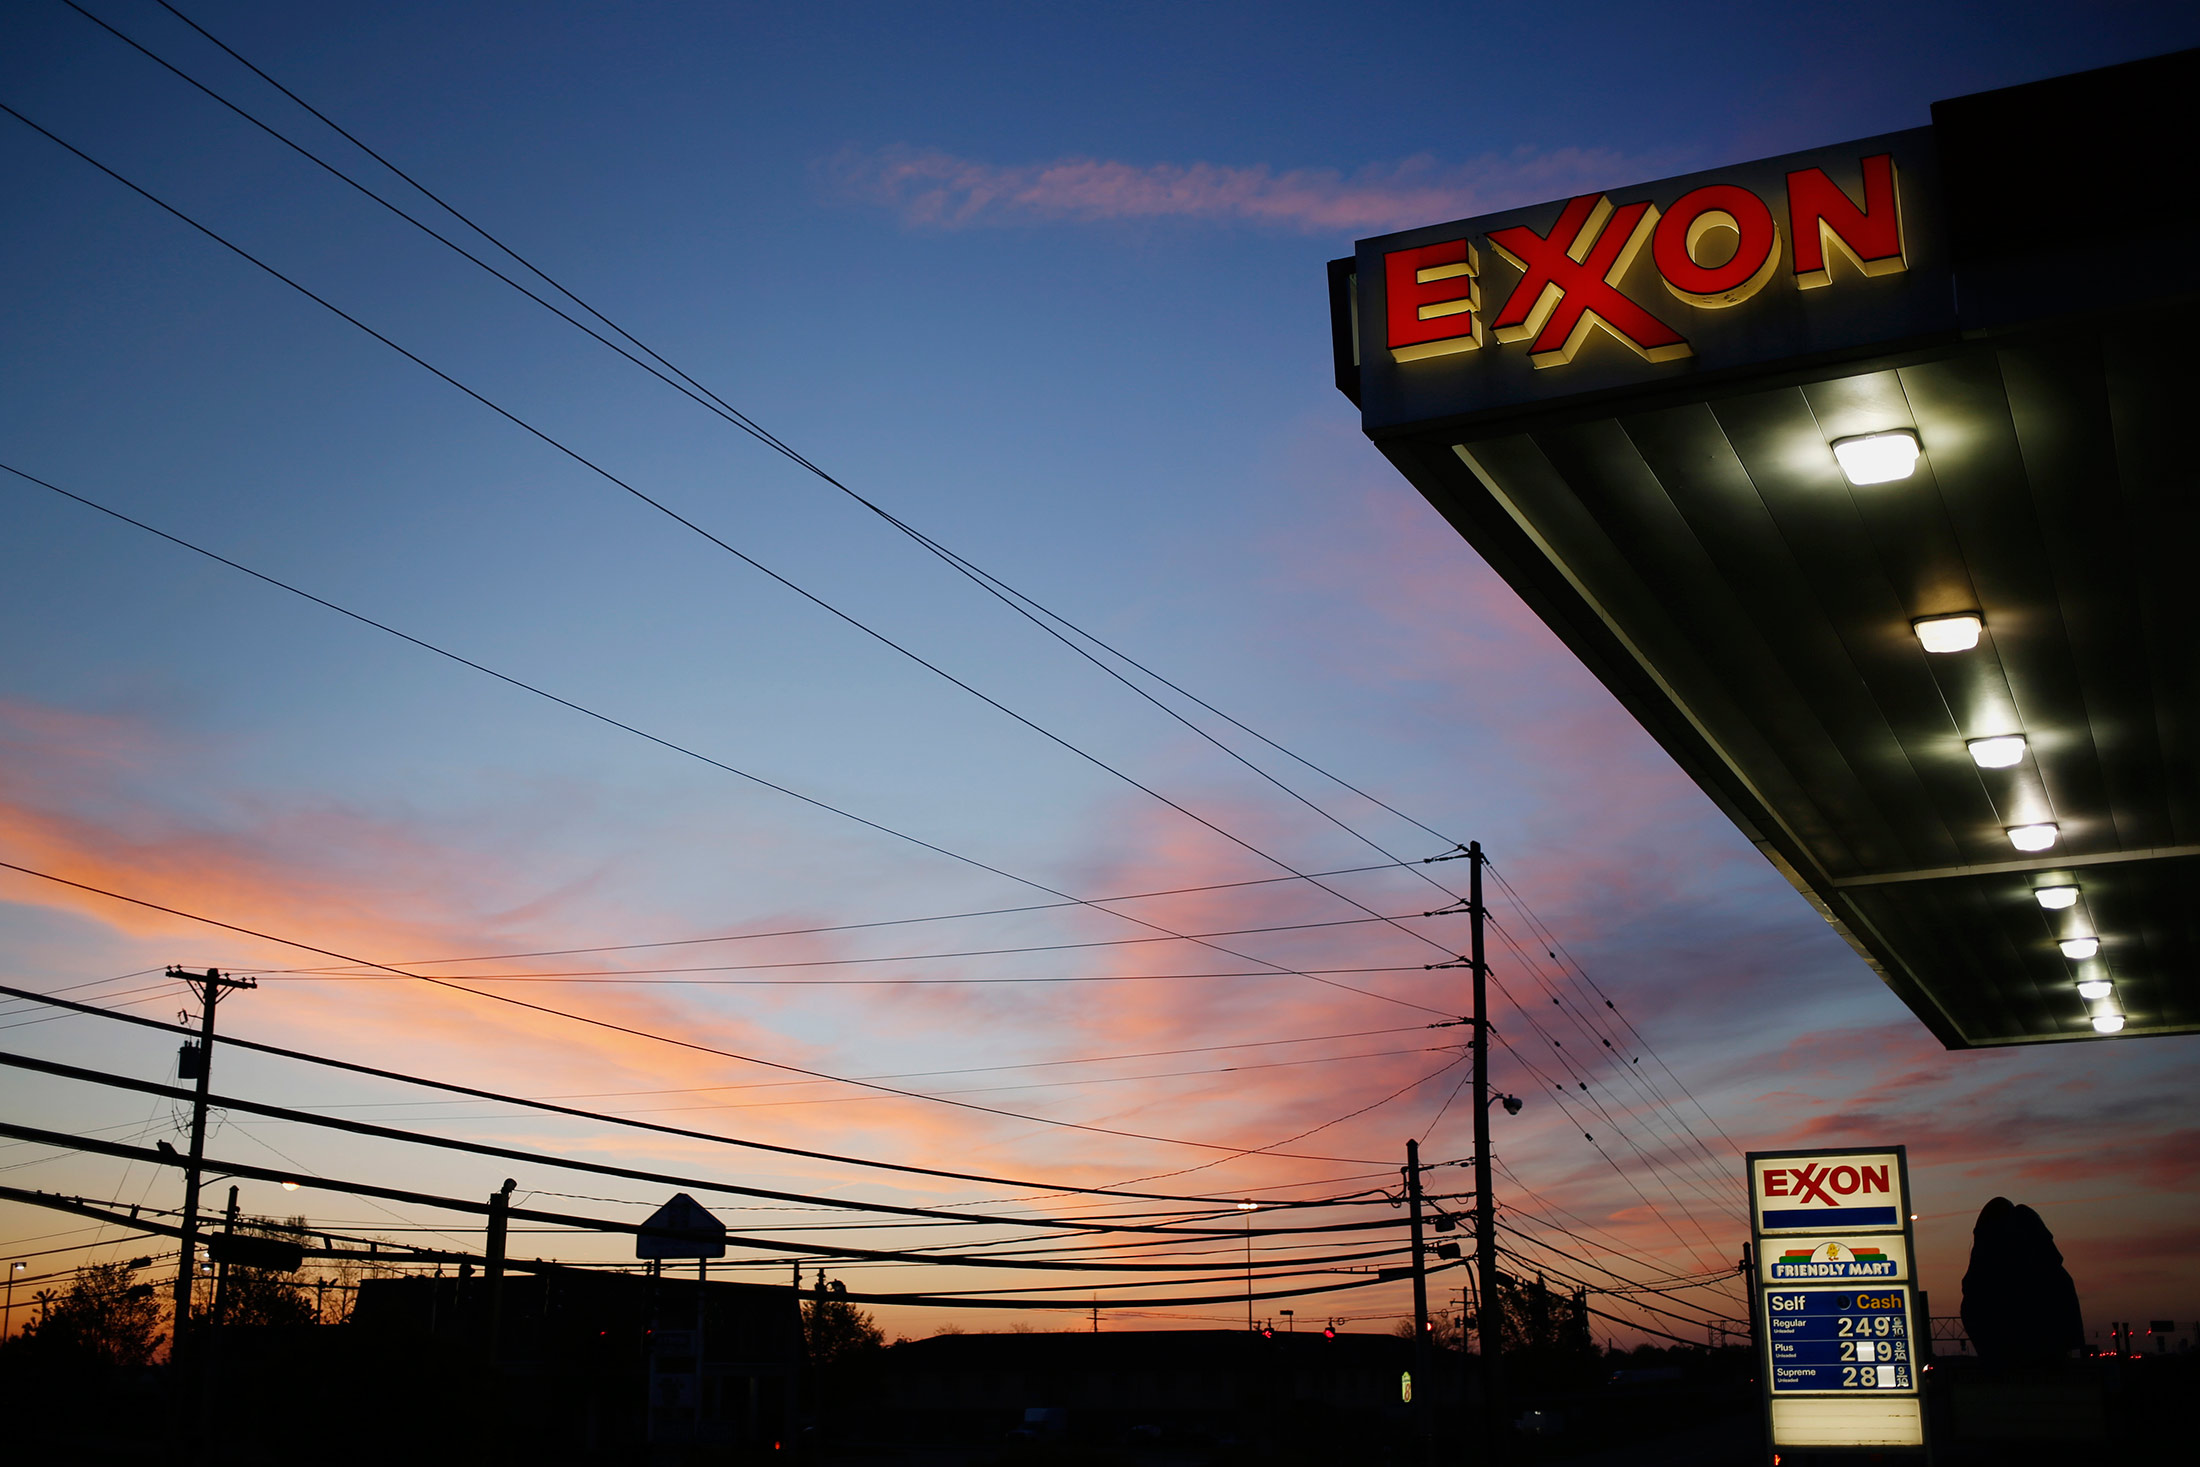 Exxon Mobil Corp., the world’s biggest oil explorer, declared a quarterly dividend on Wednesday that will raise the 2015 payout for the 33rd straight year.
